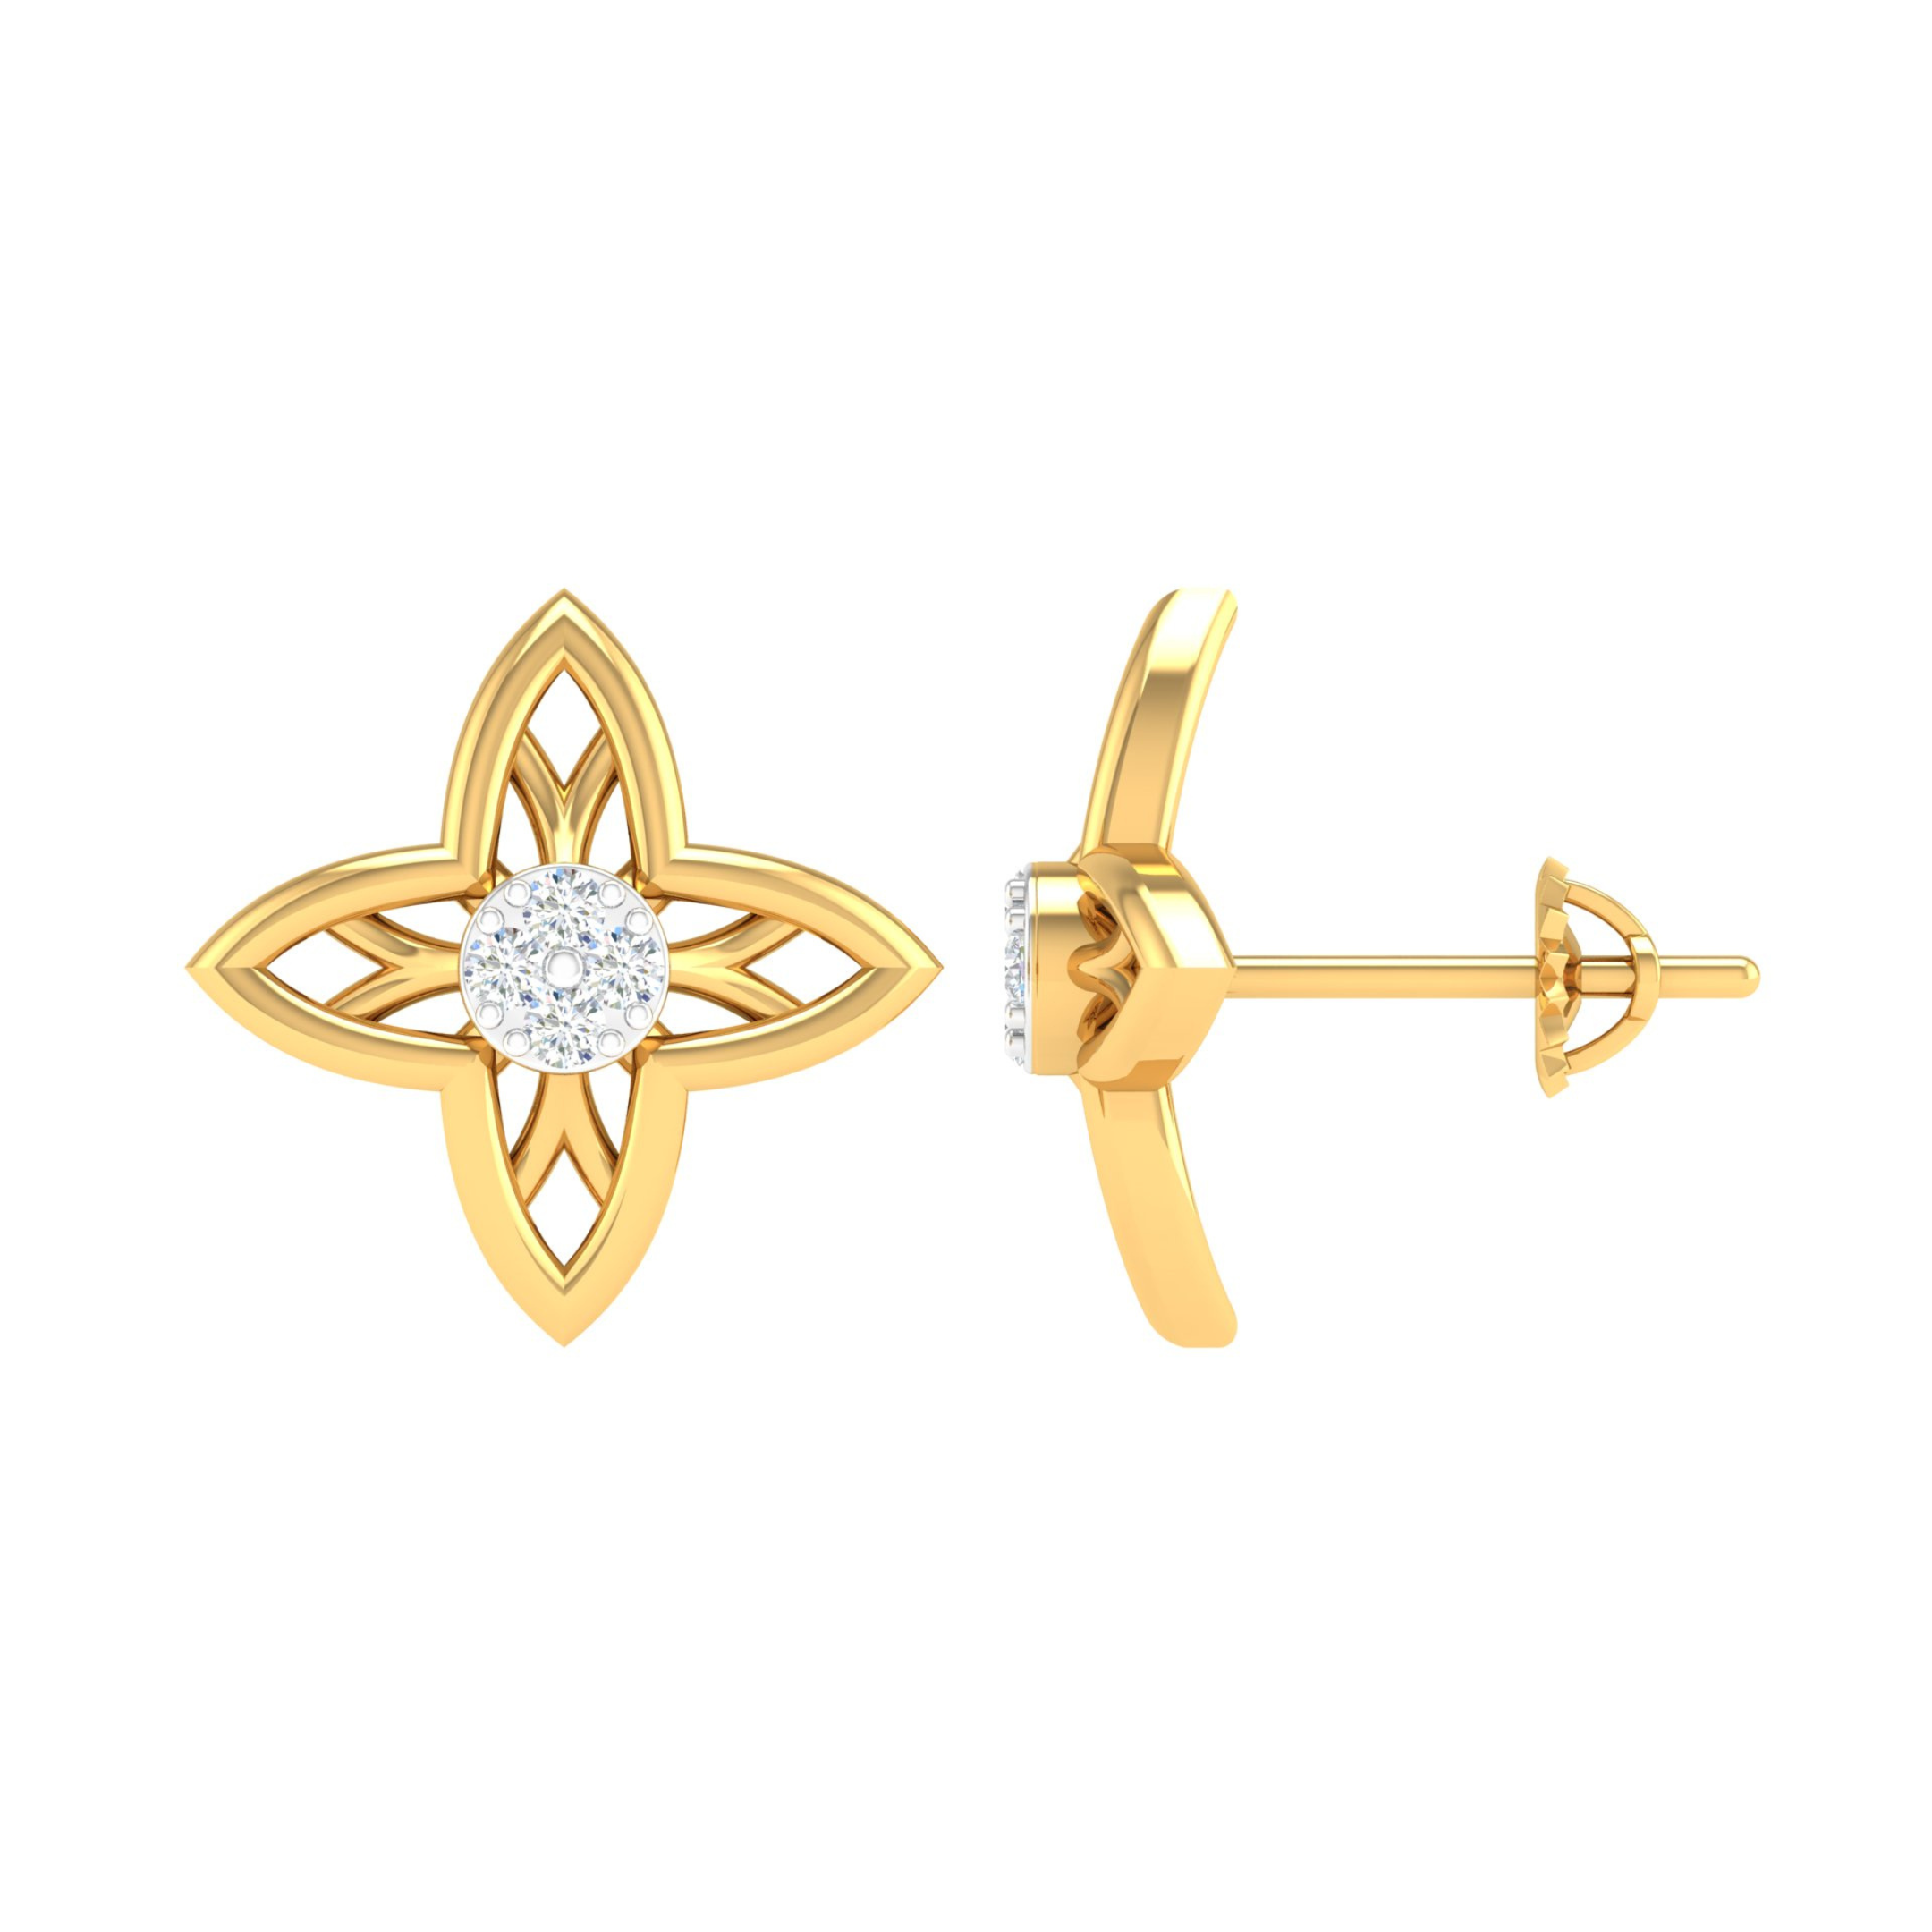 18KT YELLOW GOLD PANSY REAL DIAMOND EARRINGS